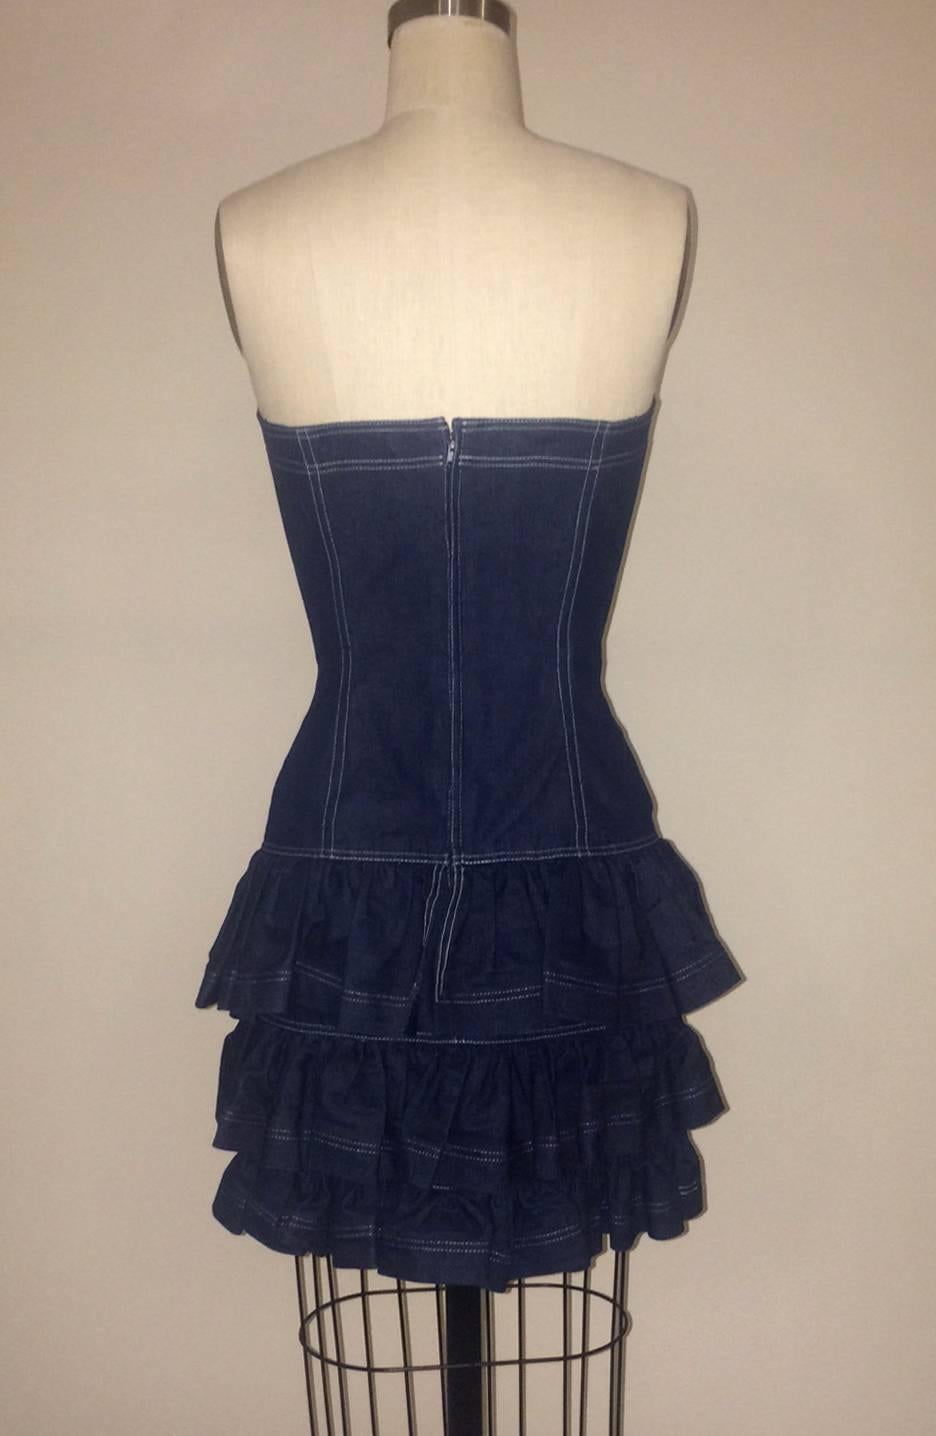 Patrick Kelly 1980s dark blue denim strapless dress with sweetheart neckline and tiered ruffle skirt. Back zip.

100% cotton.

Made in France.

Size US 6, fits more like modern 4, see measurements.
Bust 30